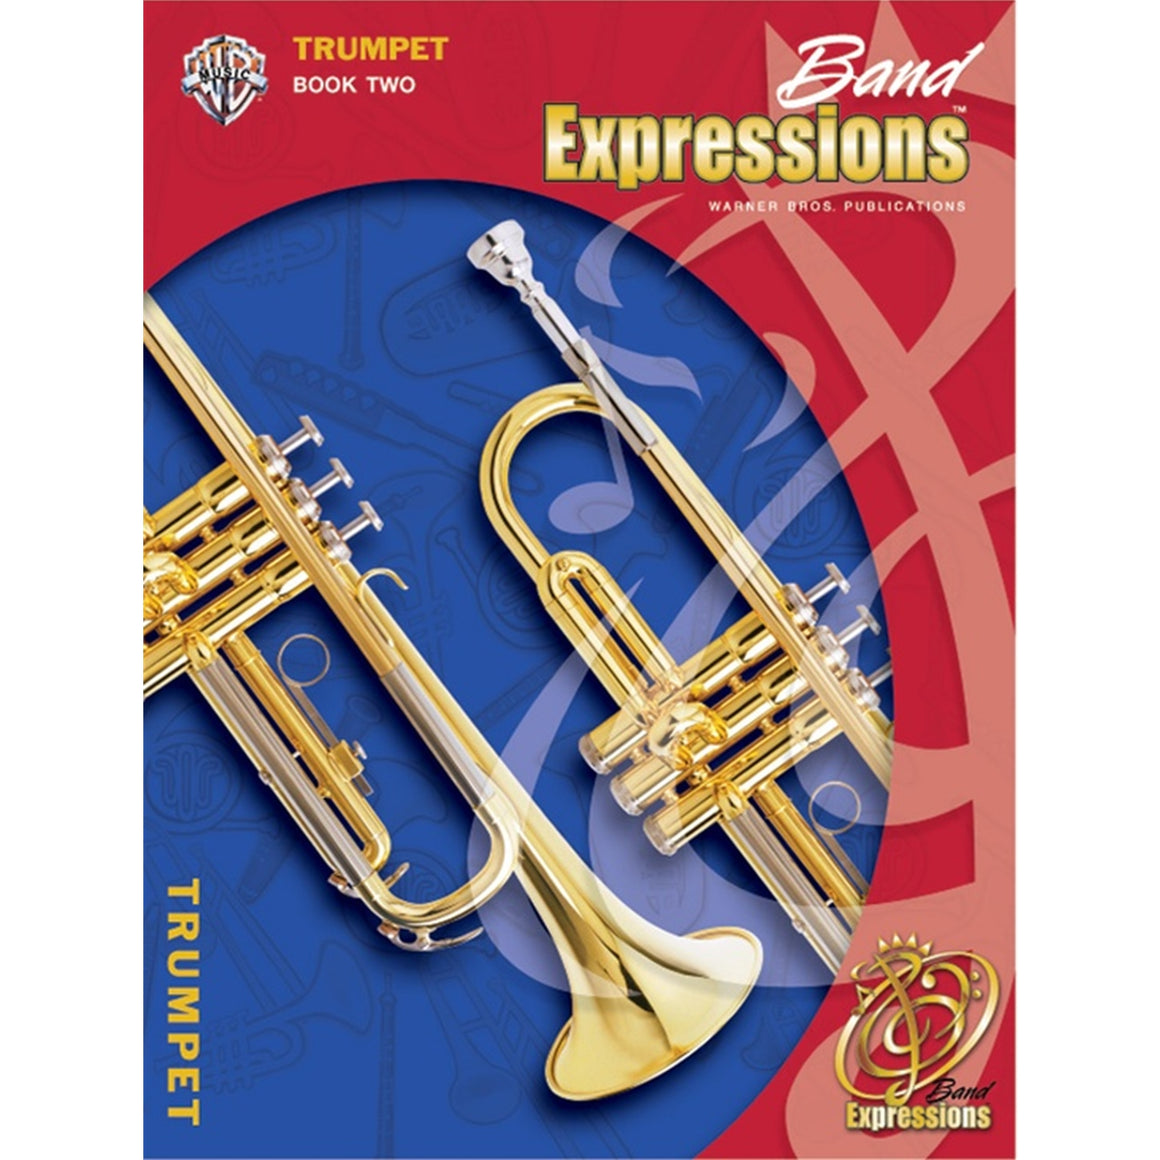 ALFRED 00EMCB2011CD Band Expressions , Book Two: Student Edition [Trumpet]